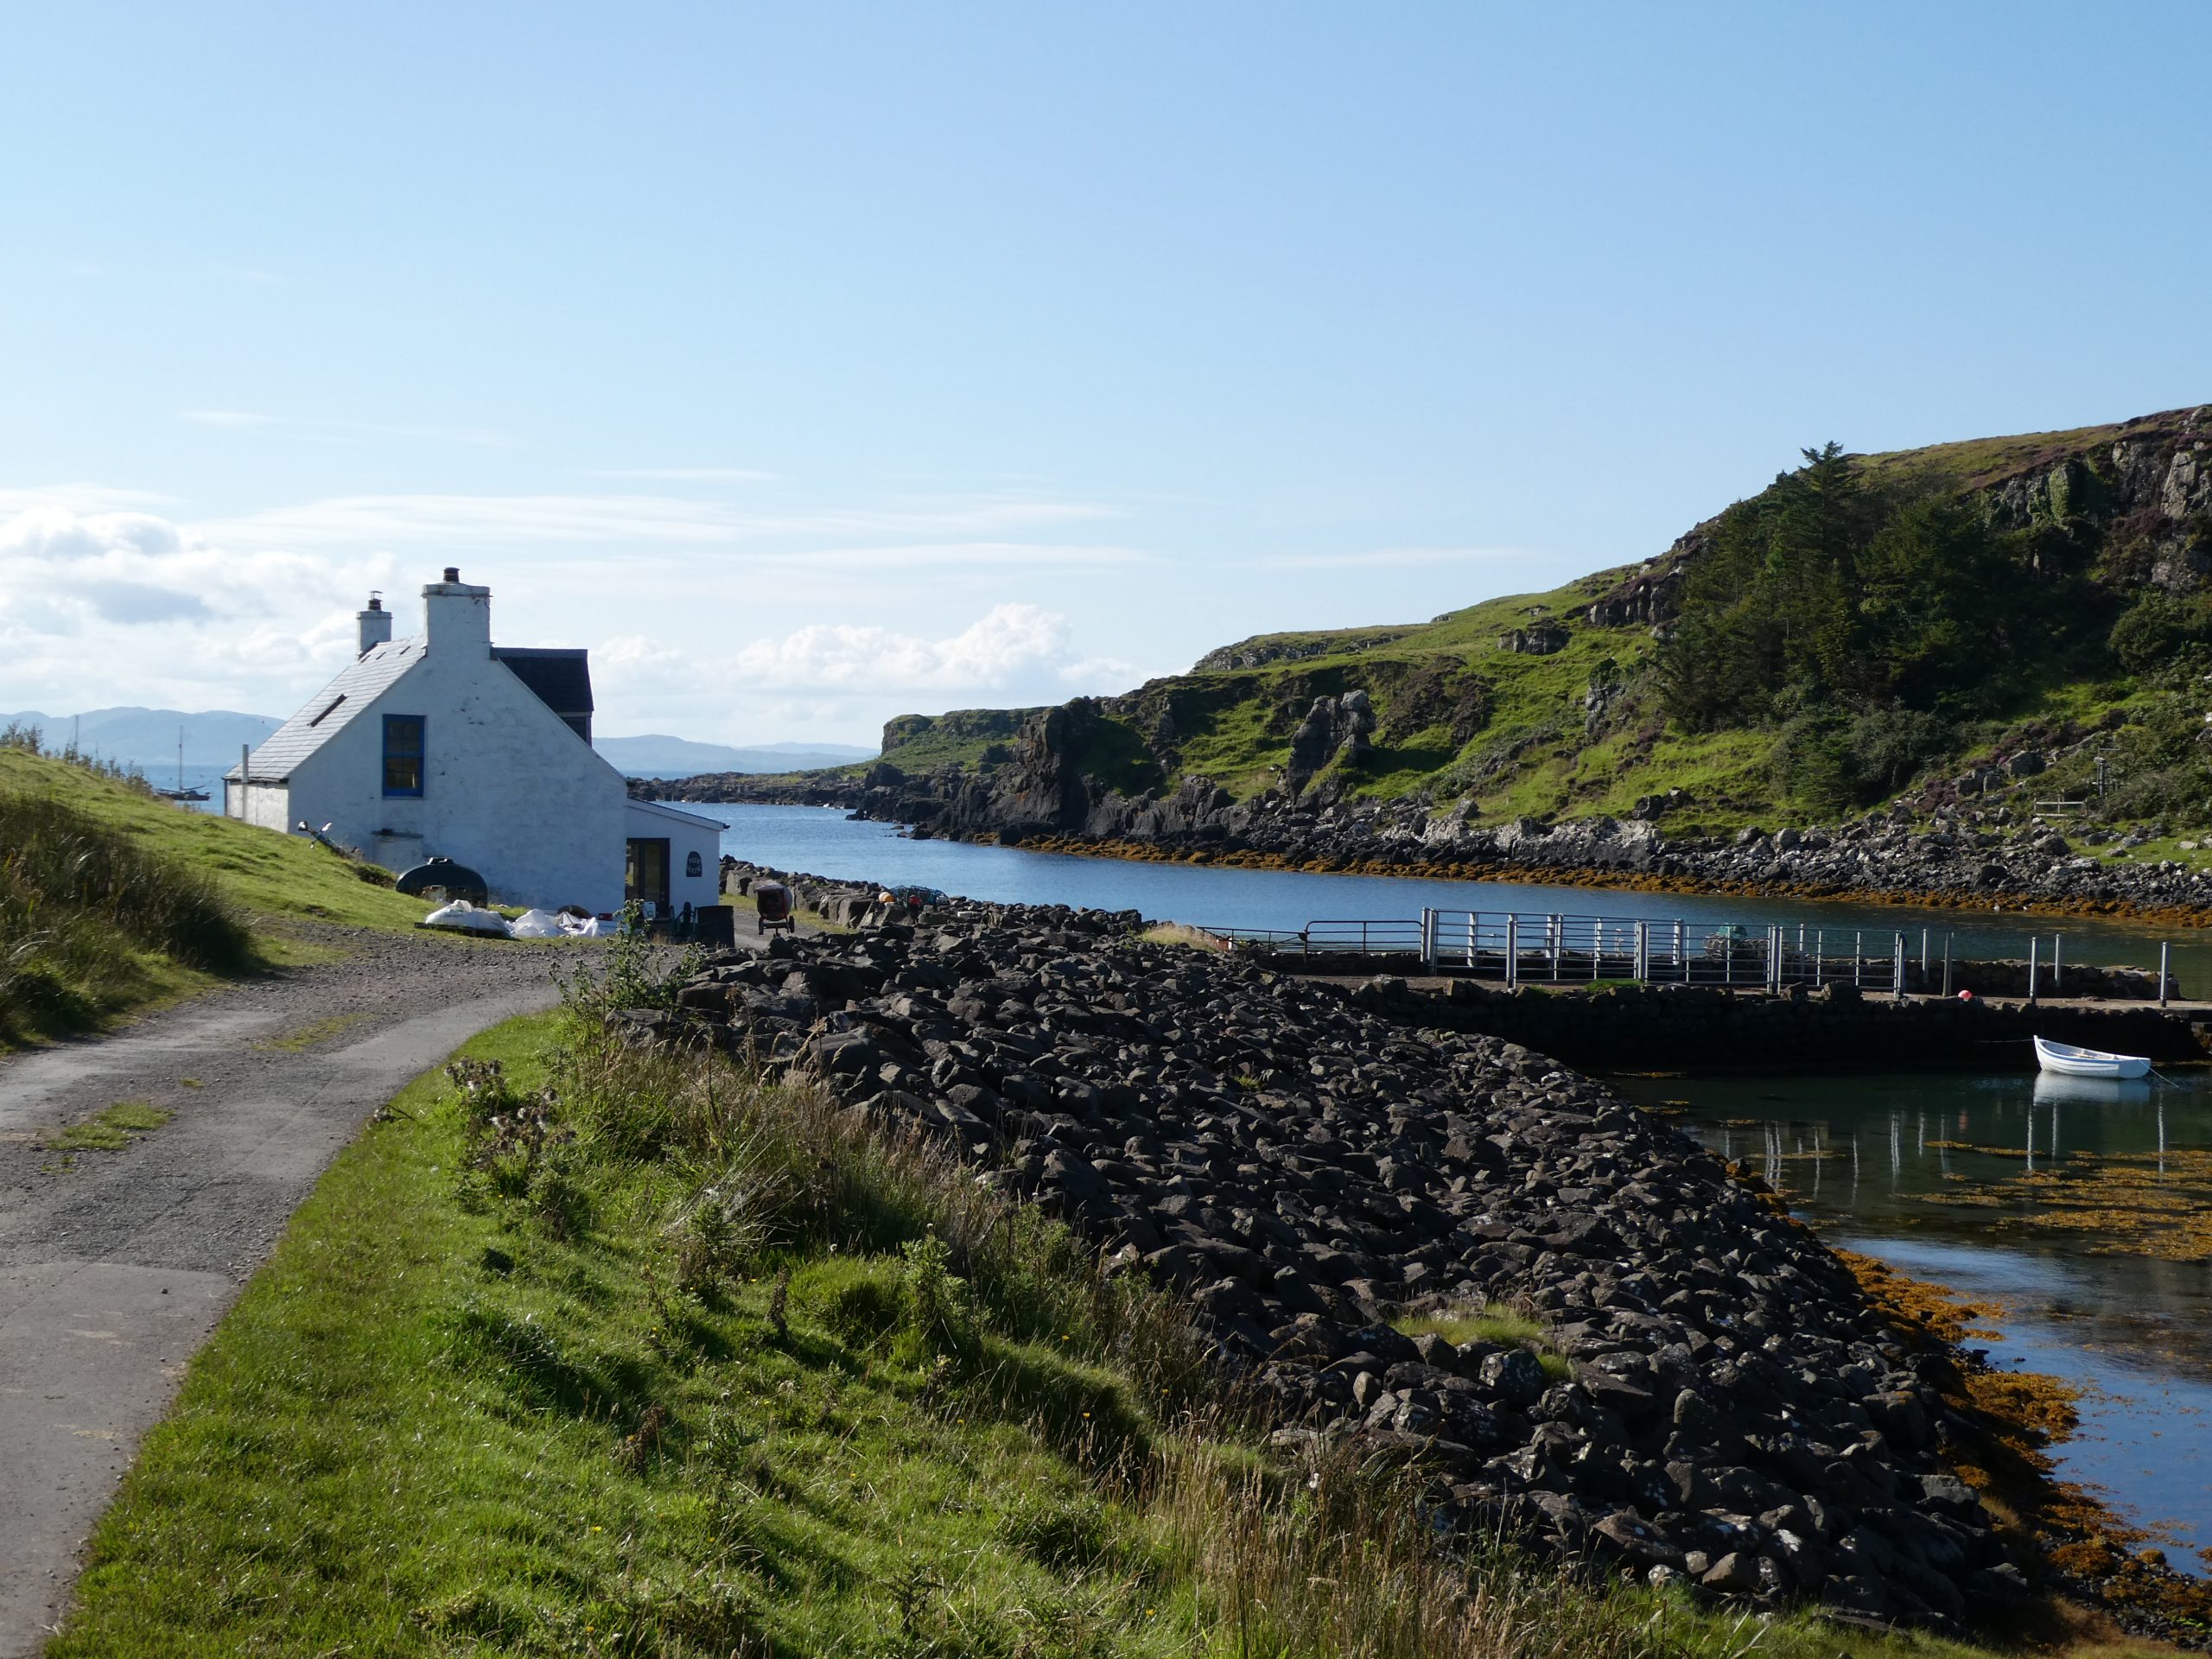 The long trick is (almost) over -Stornoway to Dunstaffnage in pictures